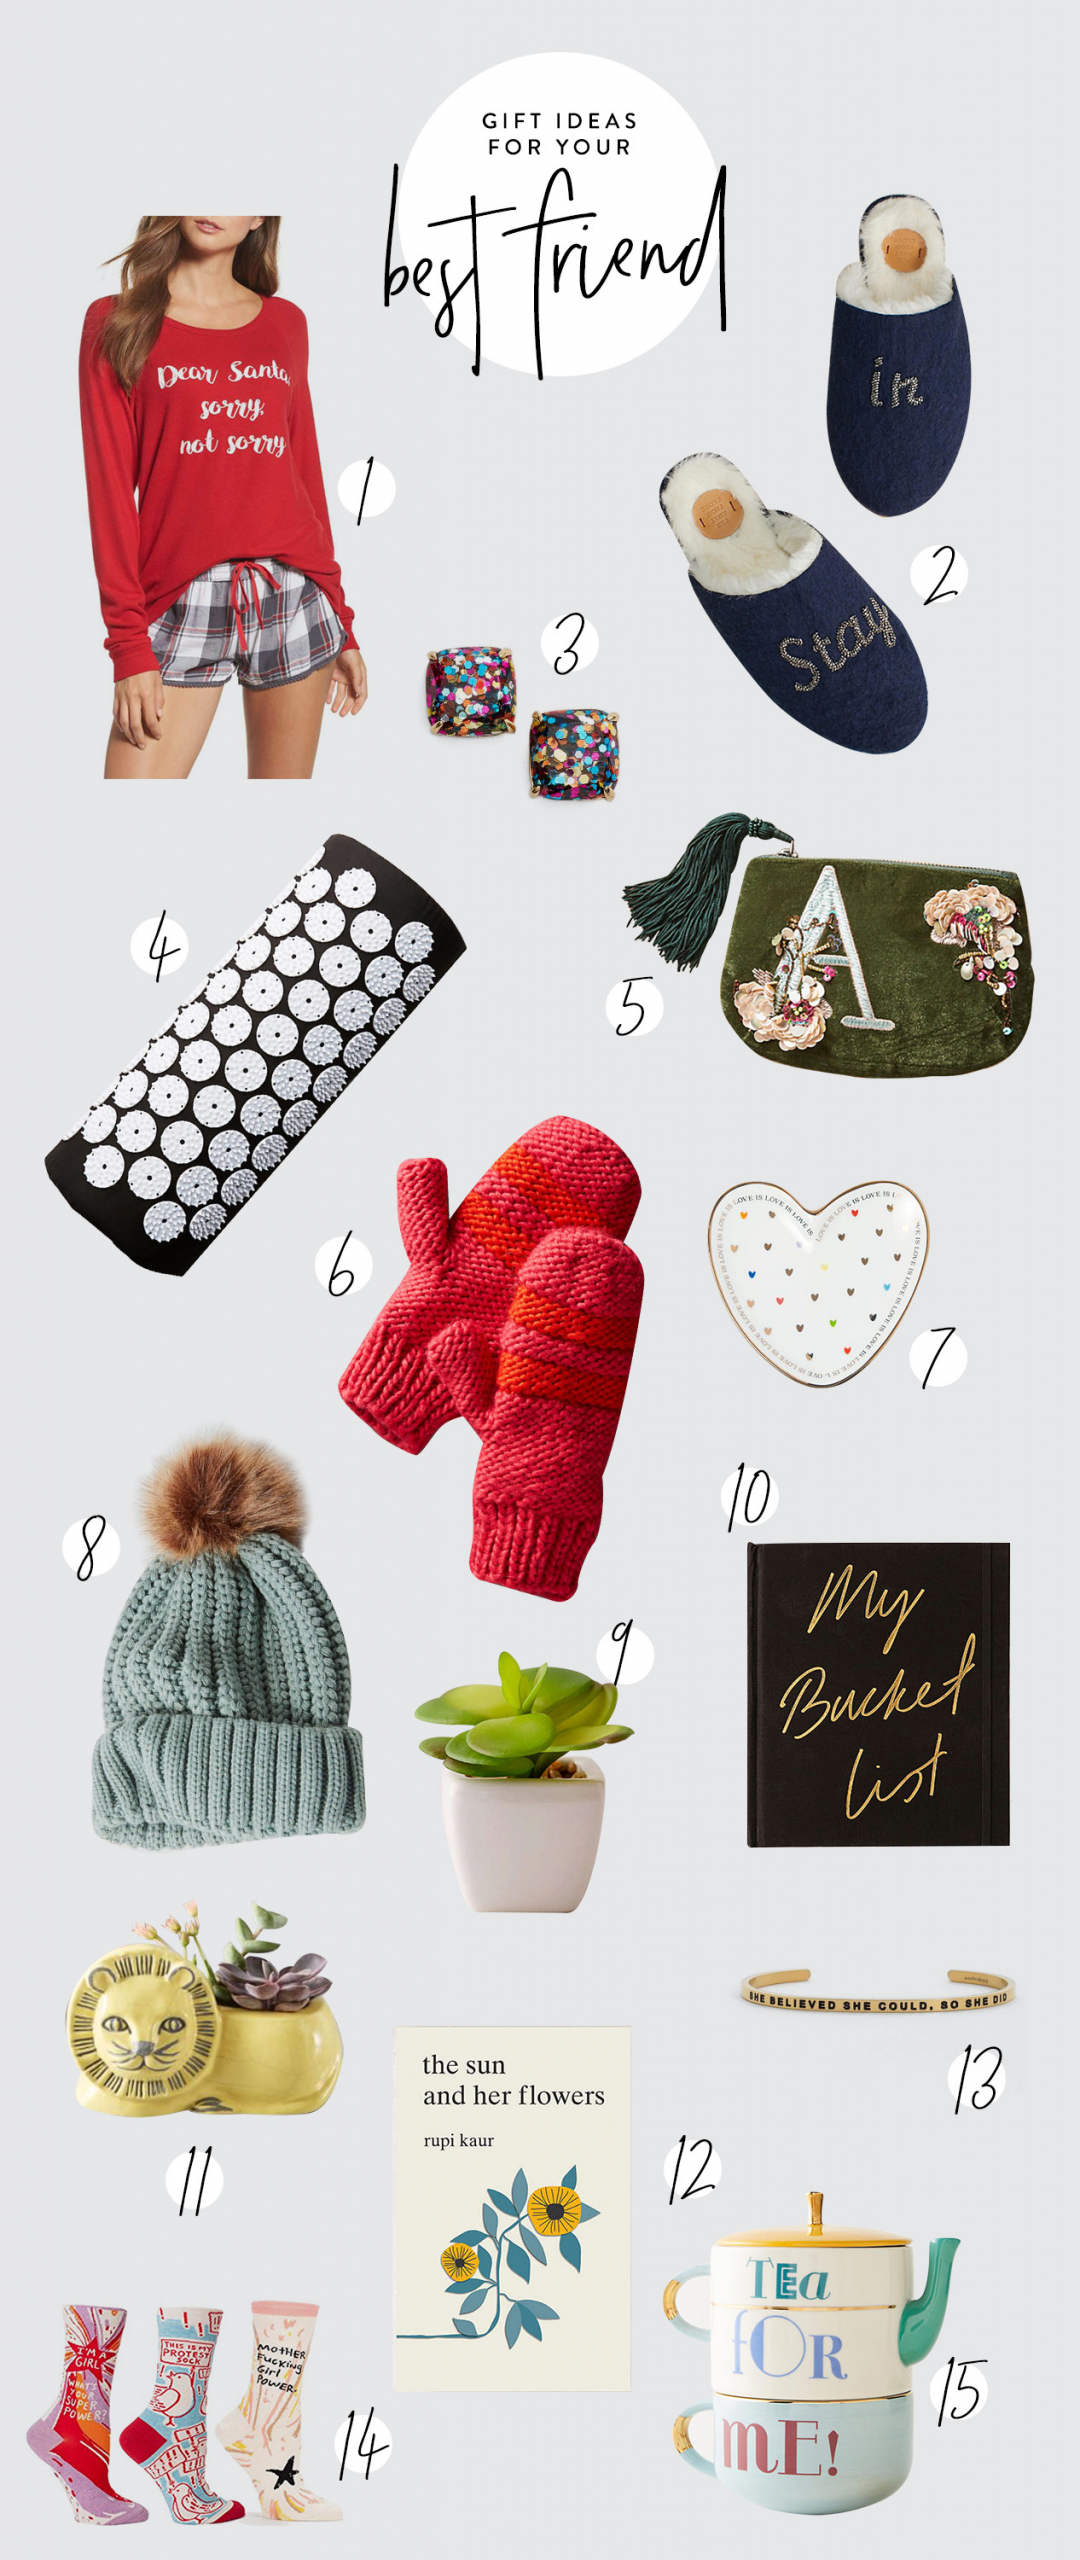 Best Gift Ideas For Best Friend
 The Ultimate Guide for Holiday Gift Ideas